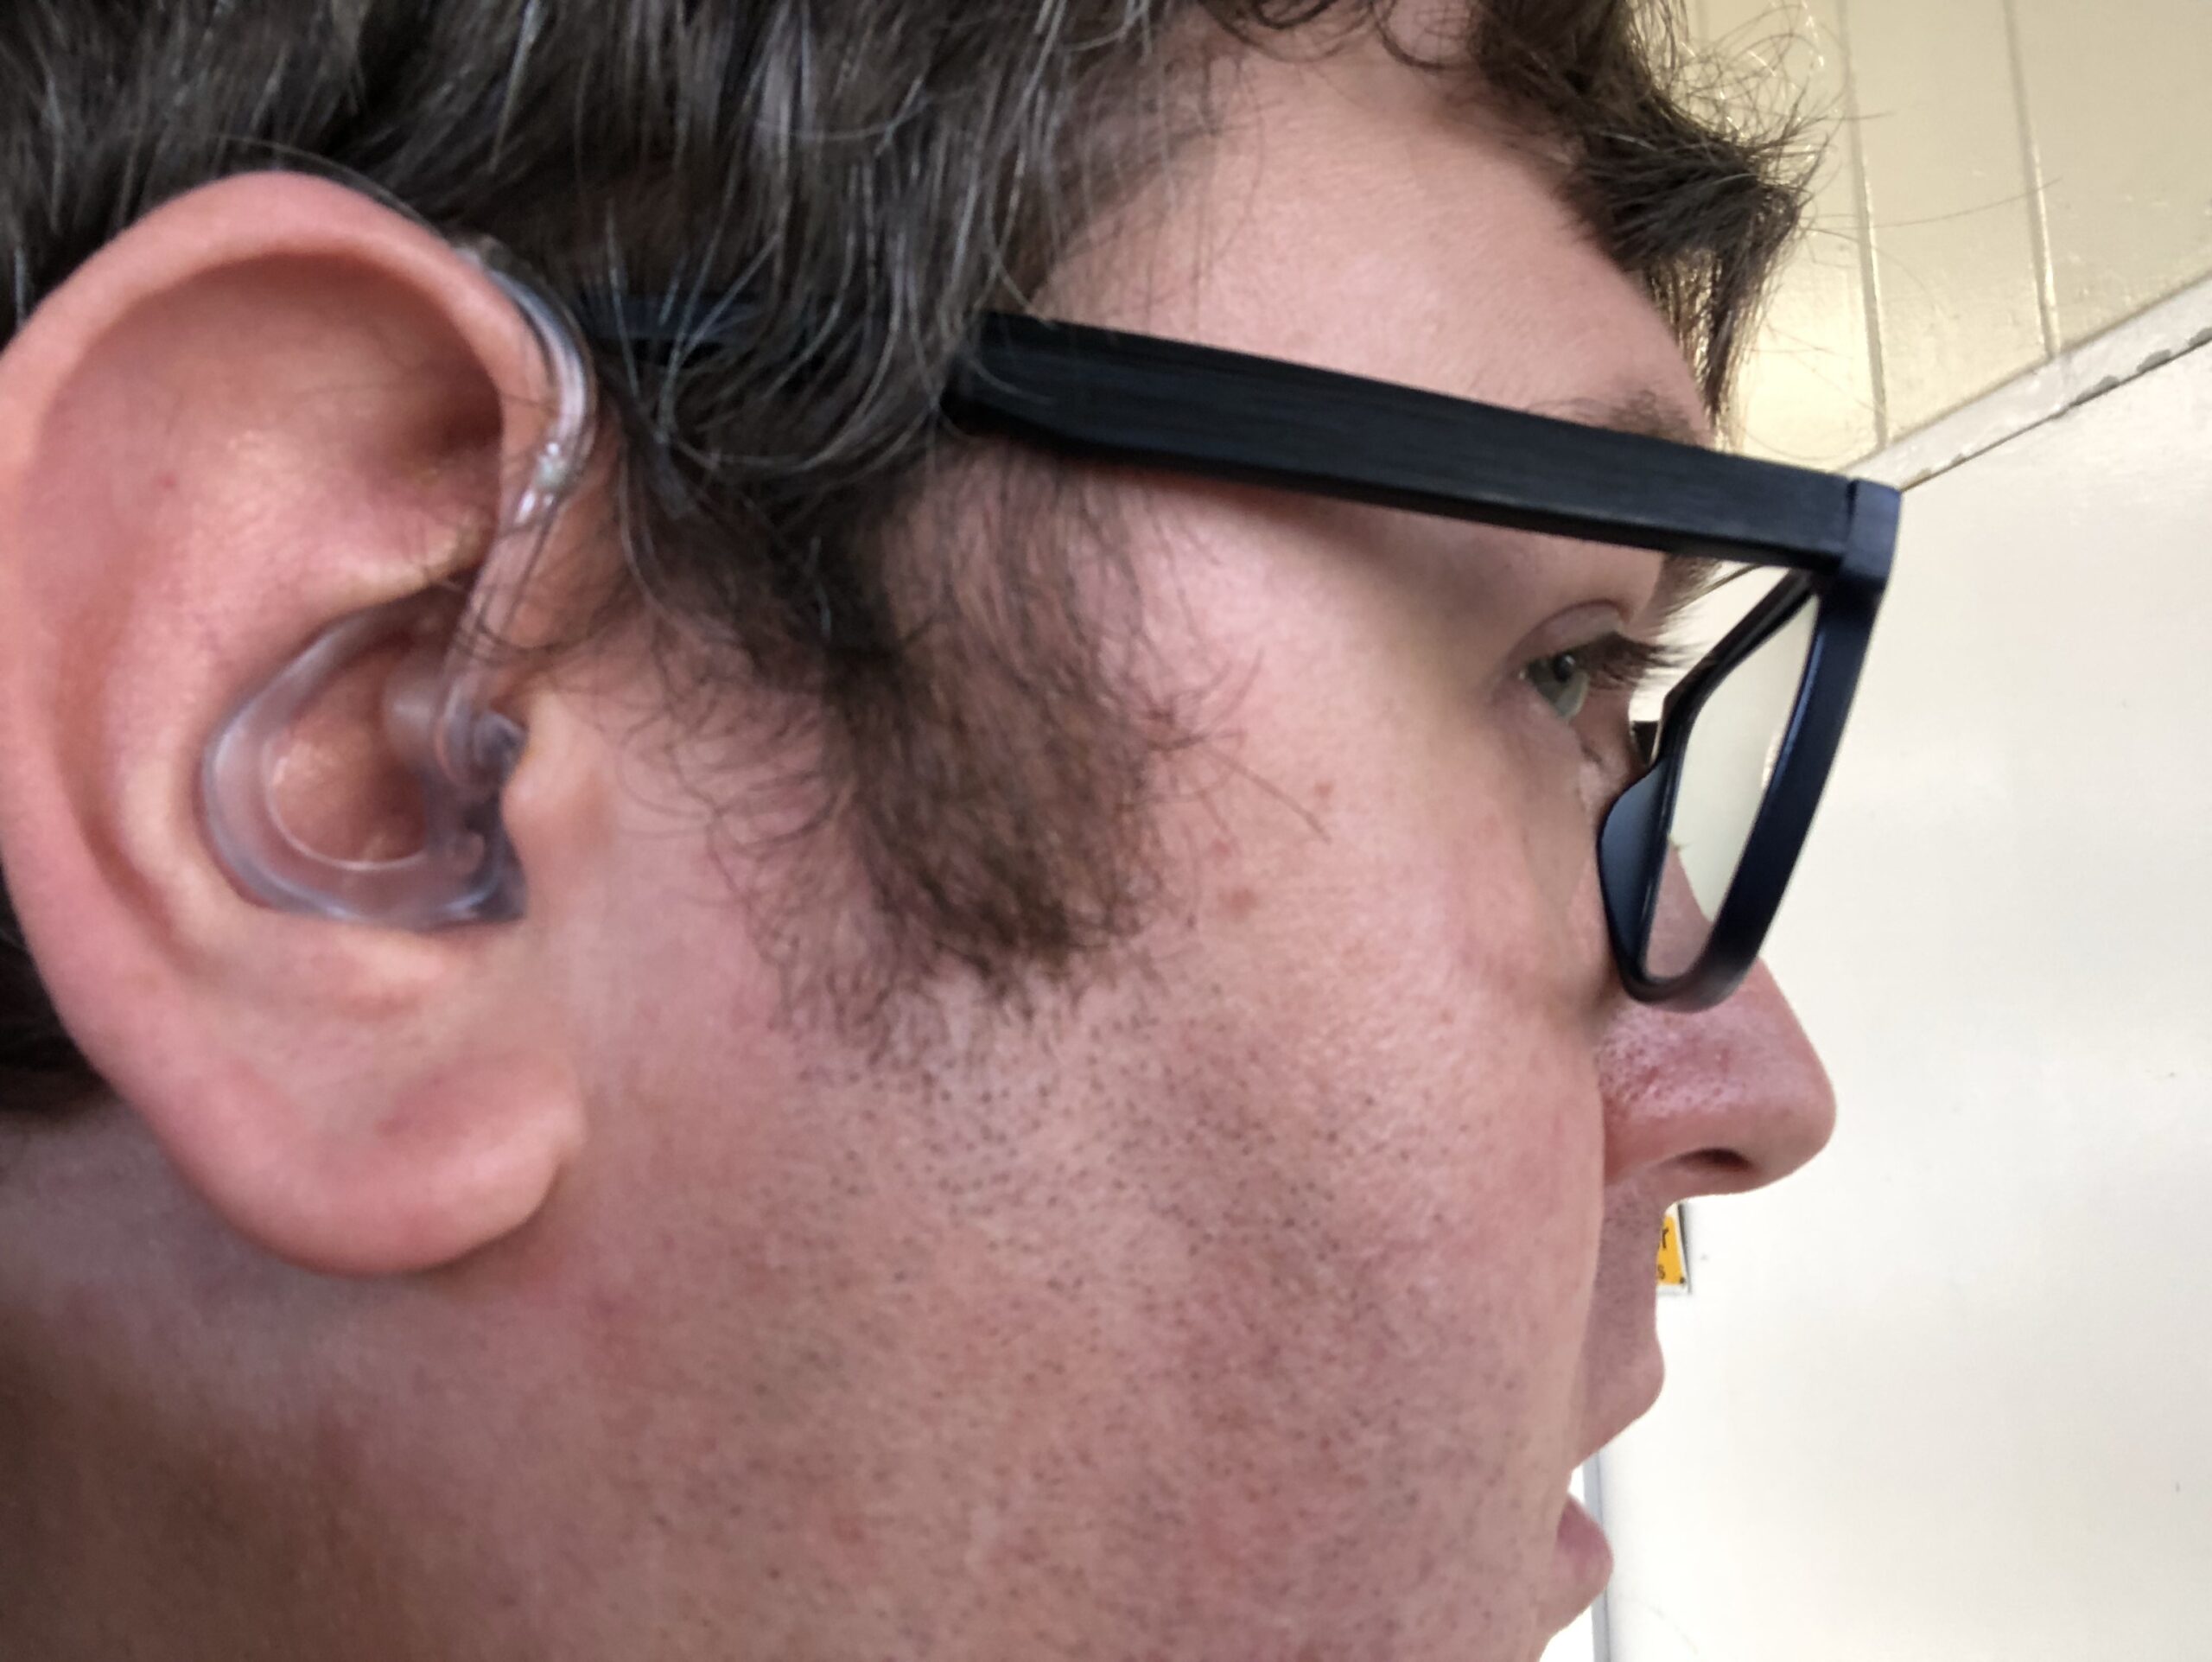 A photo of the side of my face, showing one of my hearing aids